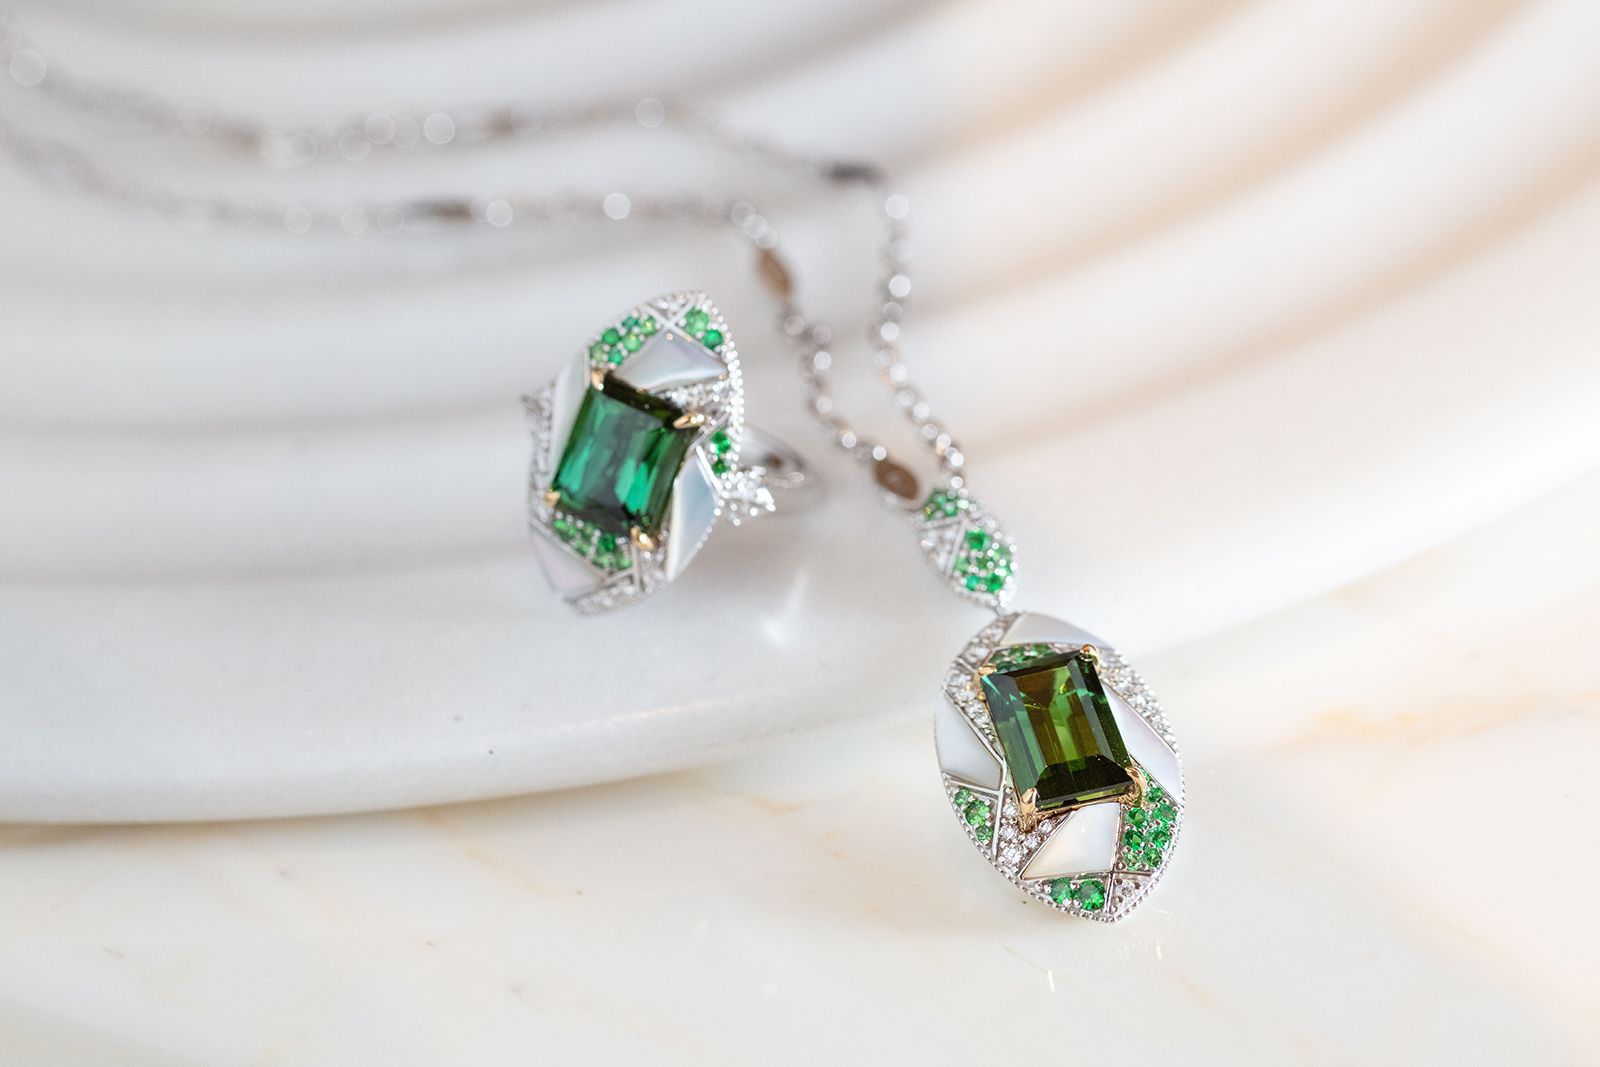 Sunita Nahata pendant and ring with green tourmalines, tsavorites, mother of pearl and diamonds in 18k white and yellow gold from the Mystic Green Tourmaline collection